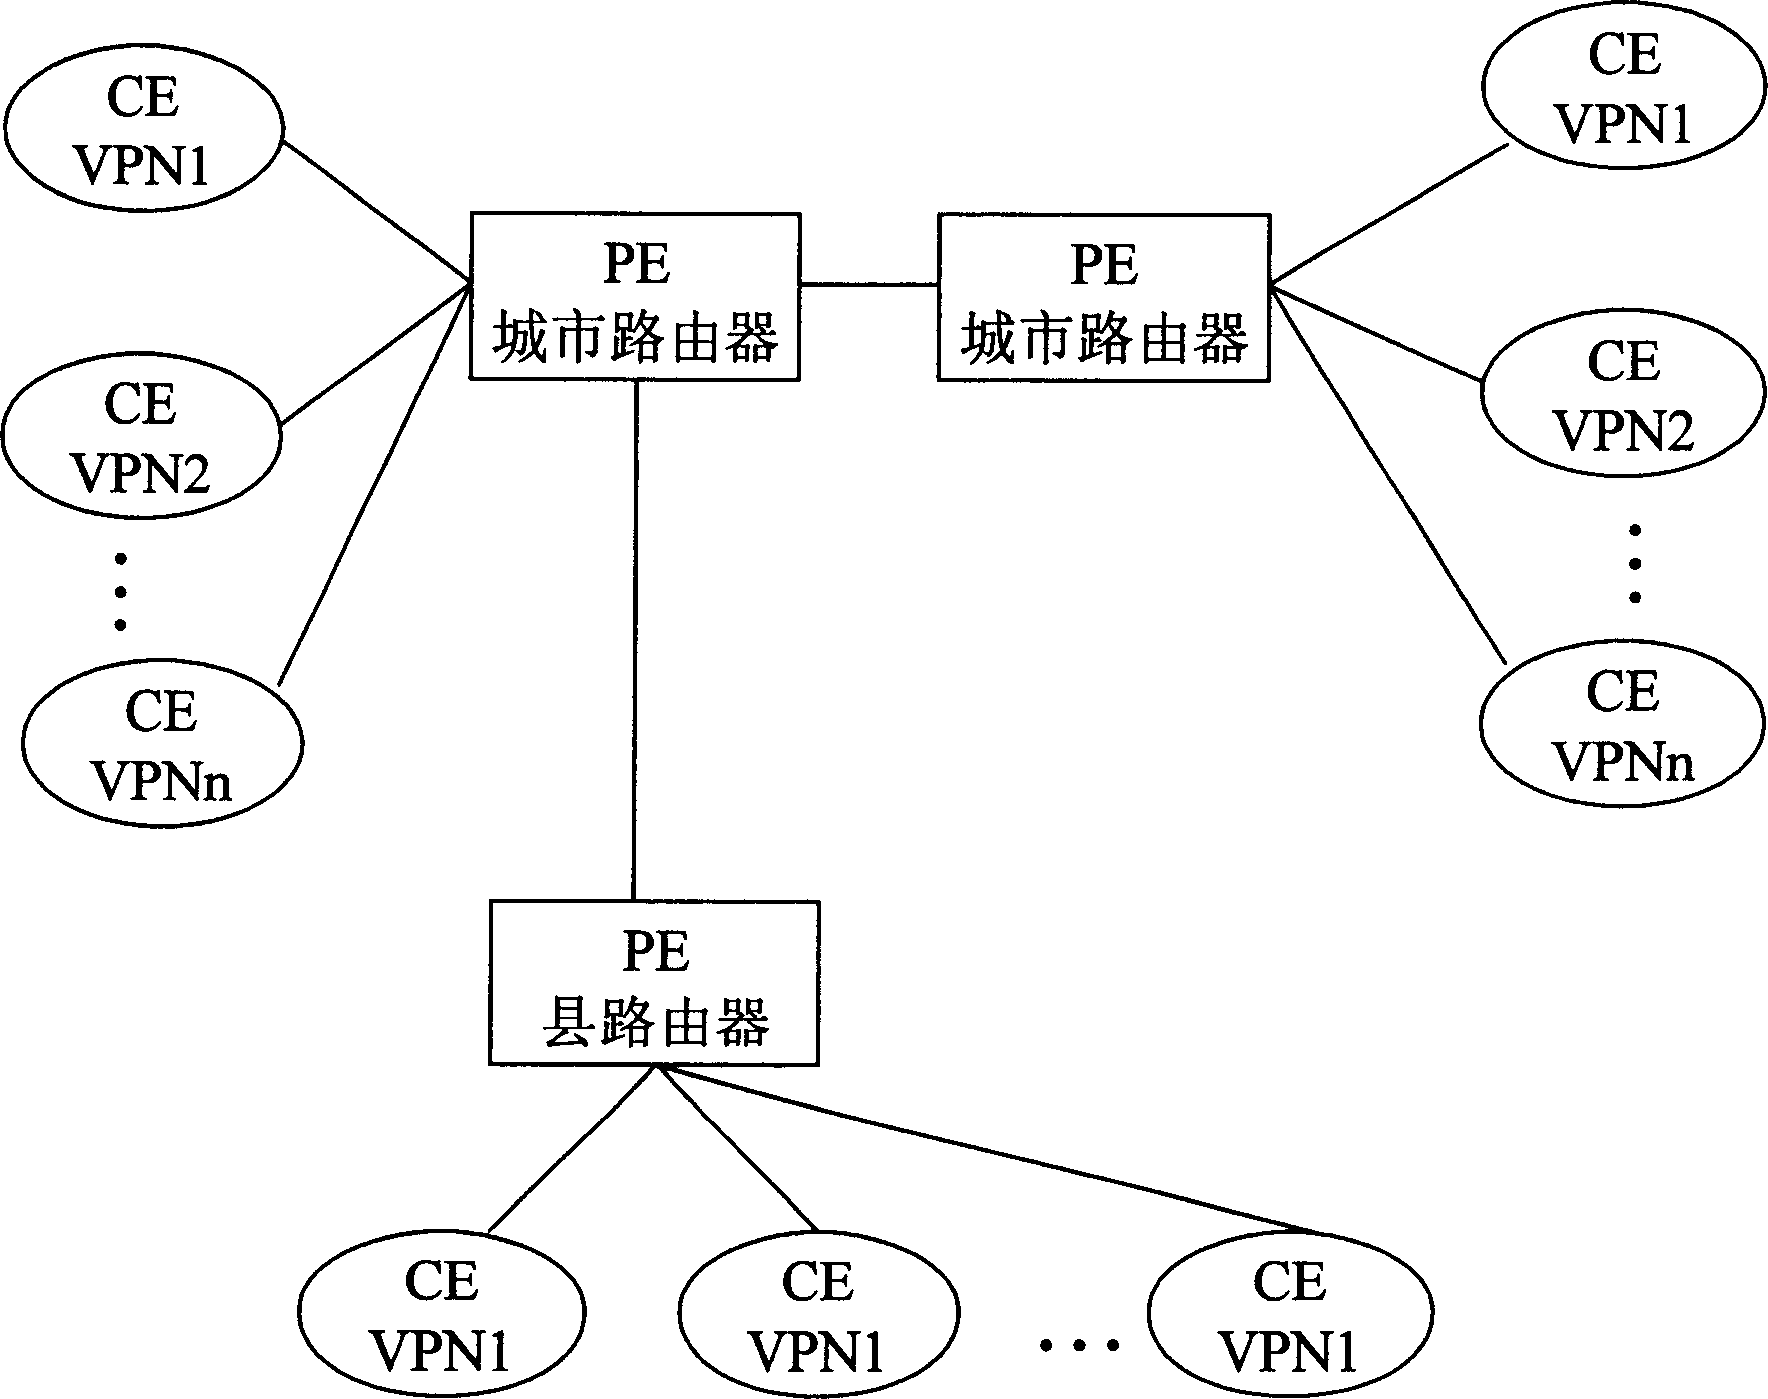 Method for core network access to multi-protocol sign exchange virtual special network